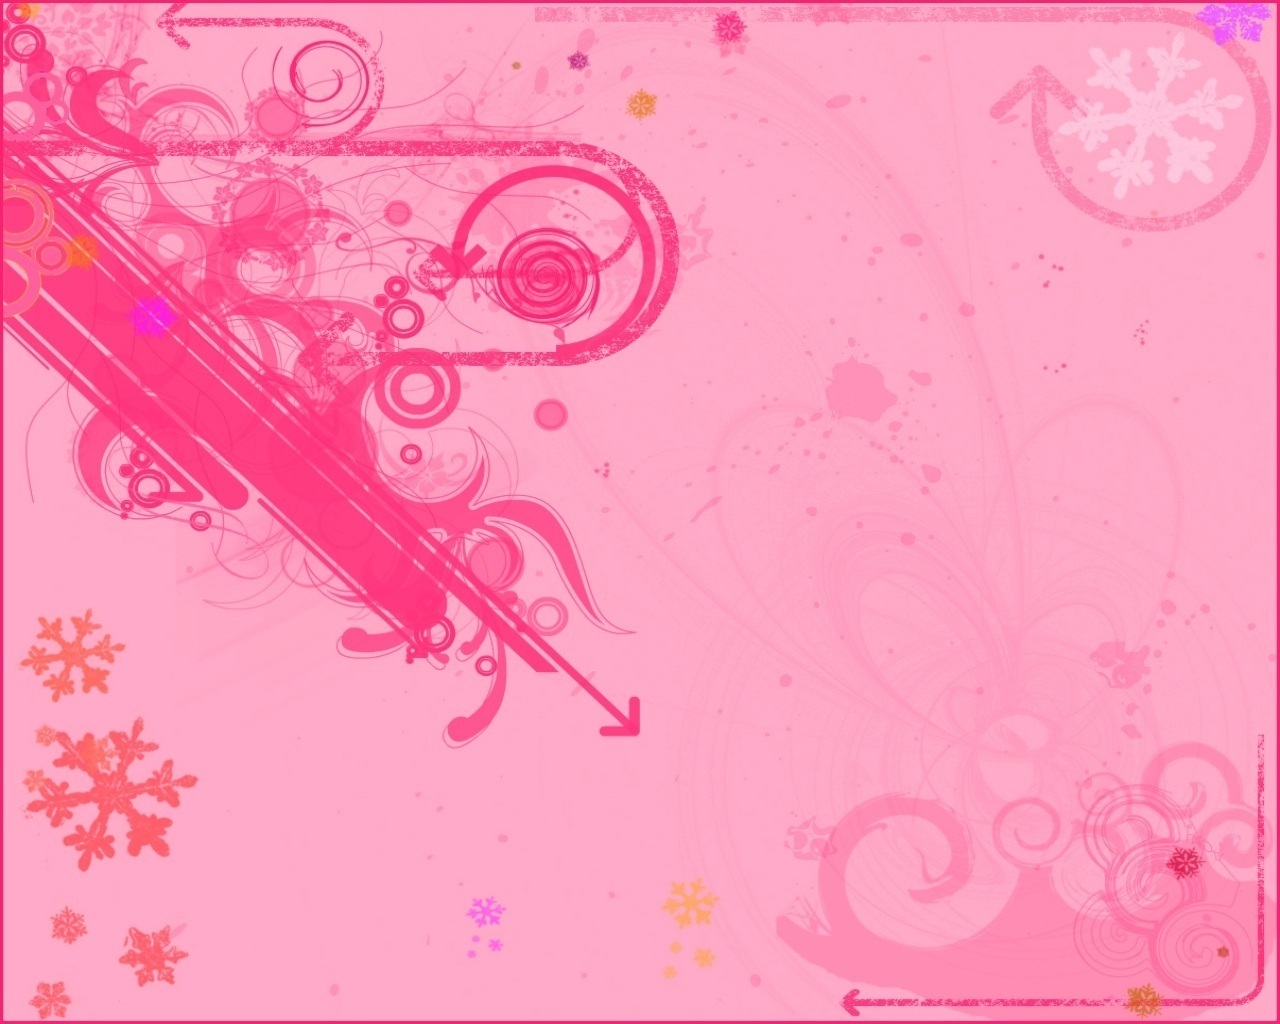 Cute Girly Wallpapers For Facebook - Pink Cute Girly Background - HD Wallpaper 